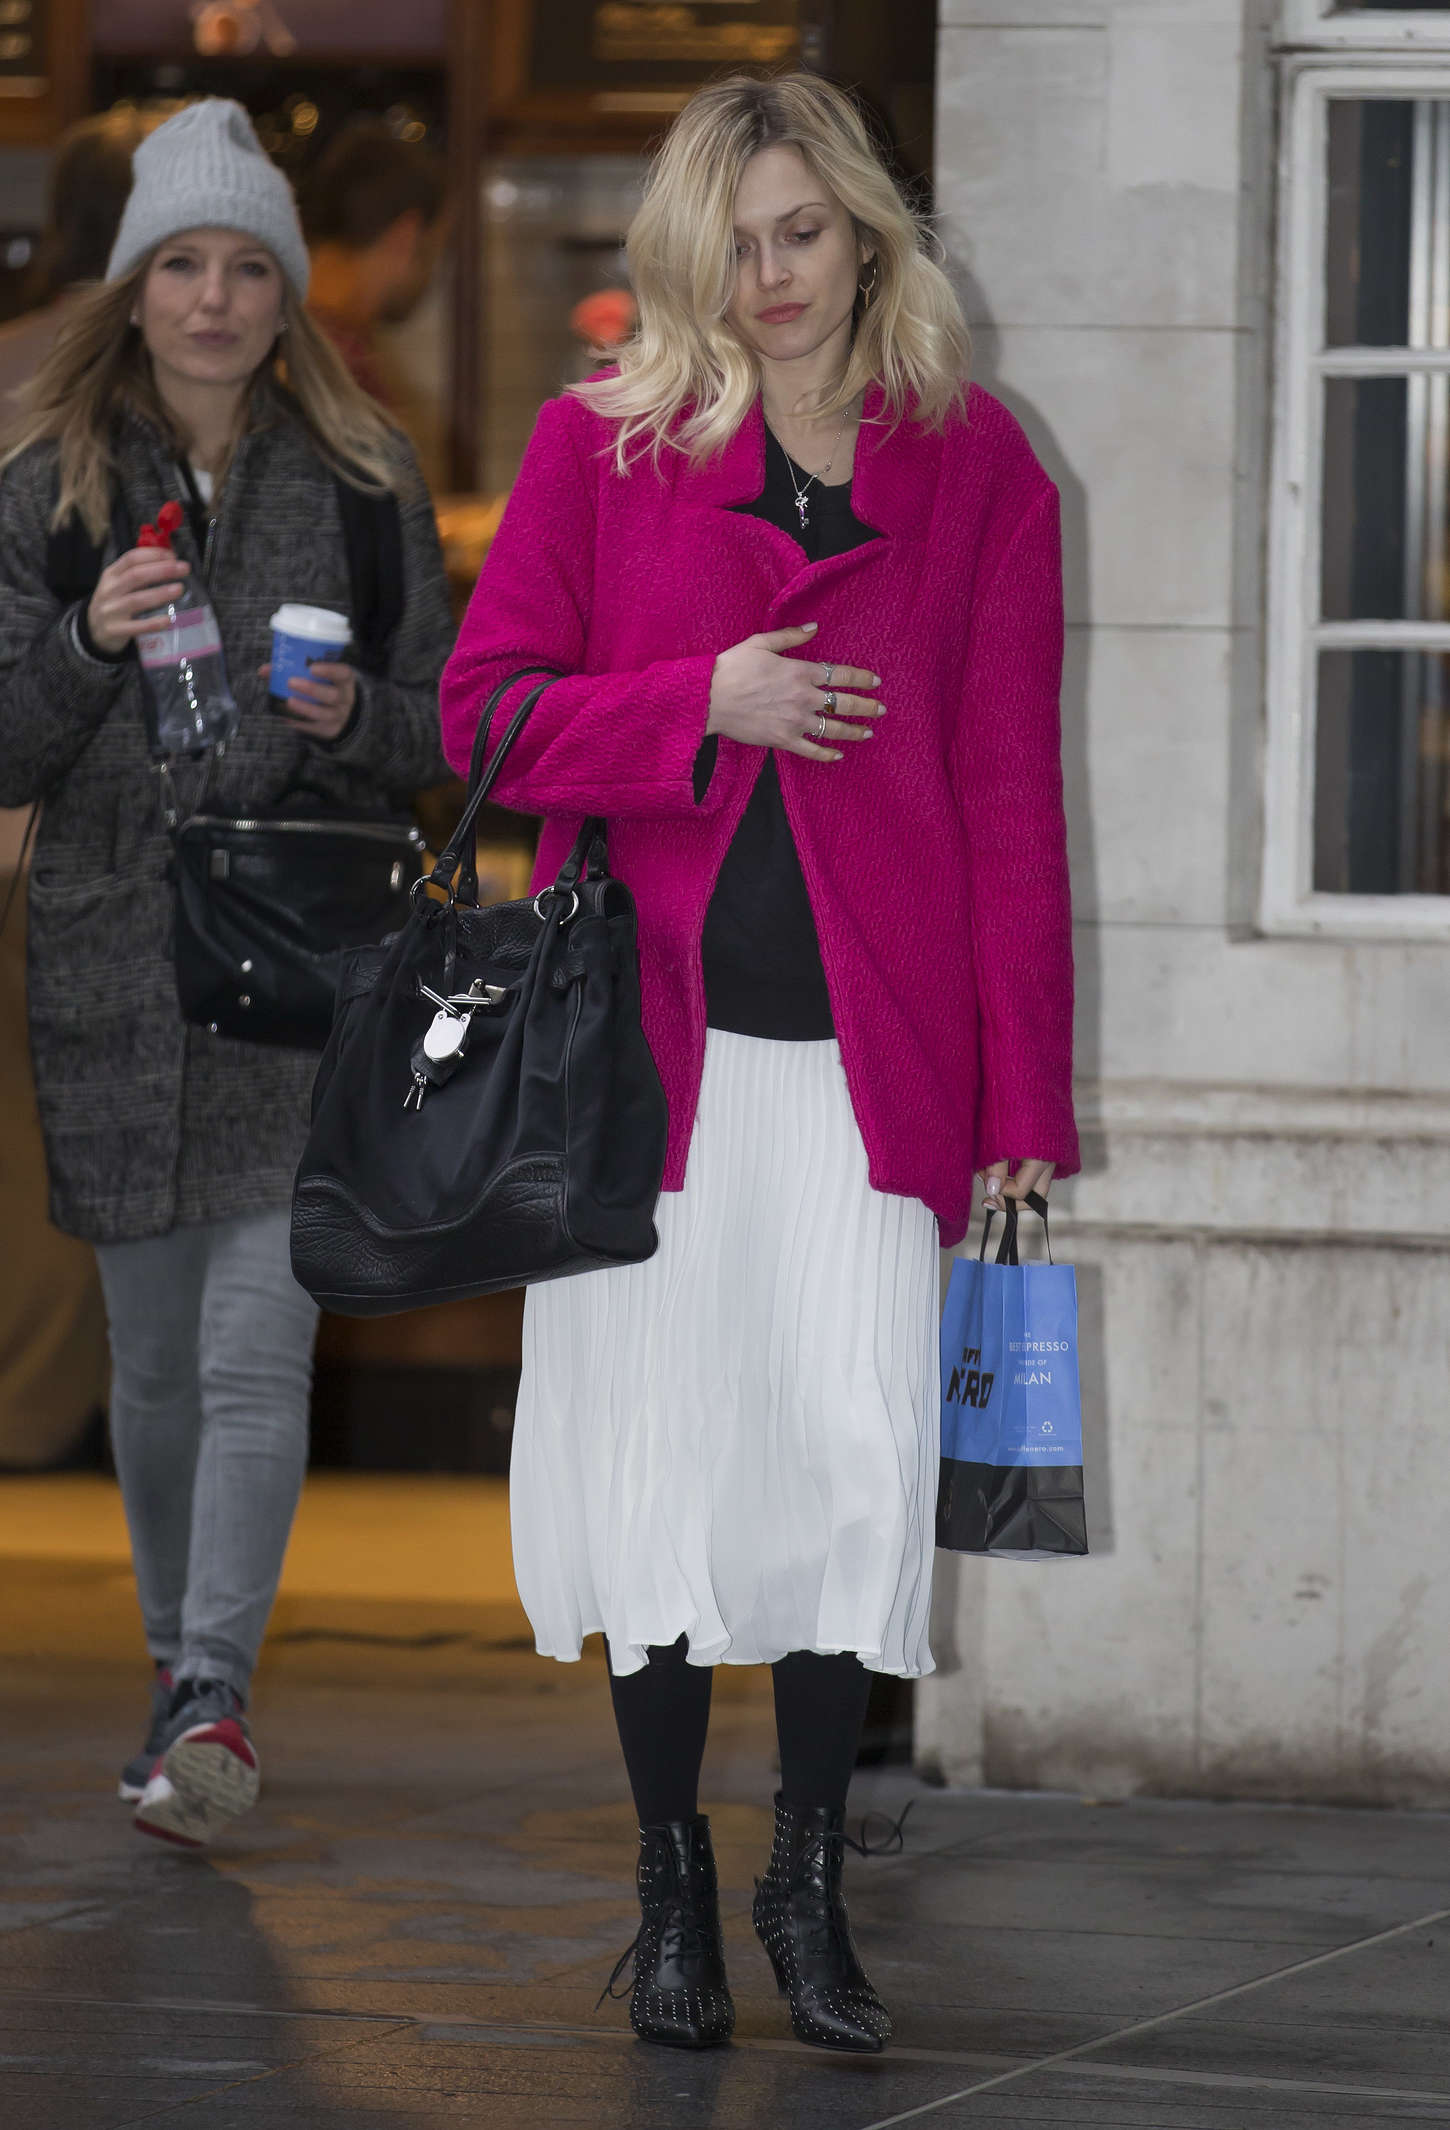 Fearne Cotton in White Skirt at BBC Radio studios in London-1